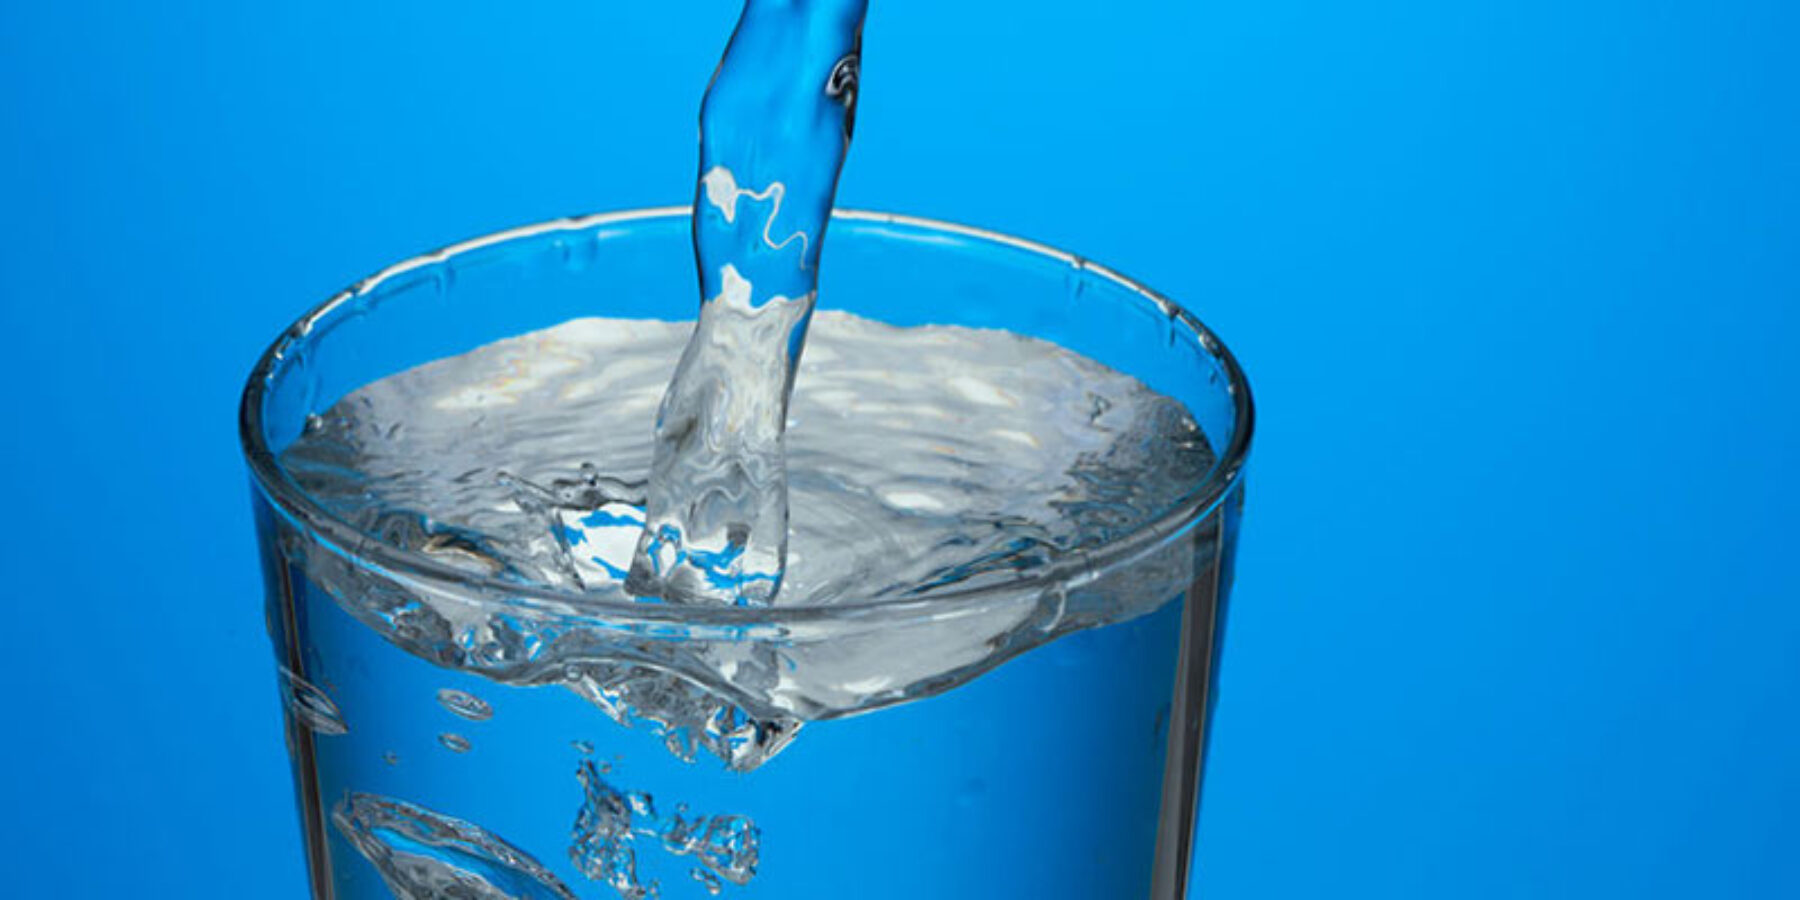 Water being poured into clear glass with a bright blue background